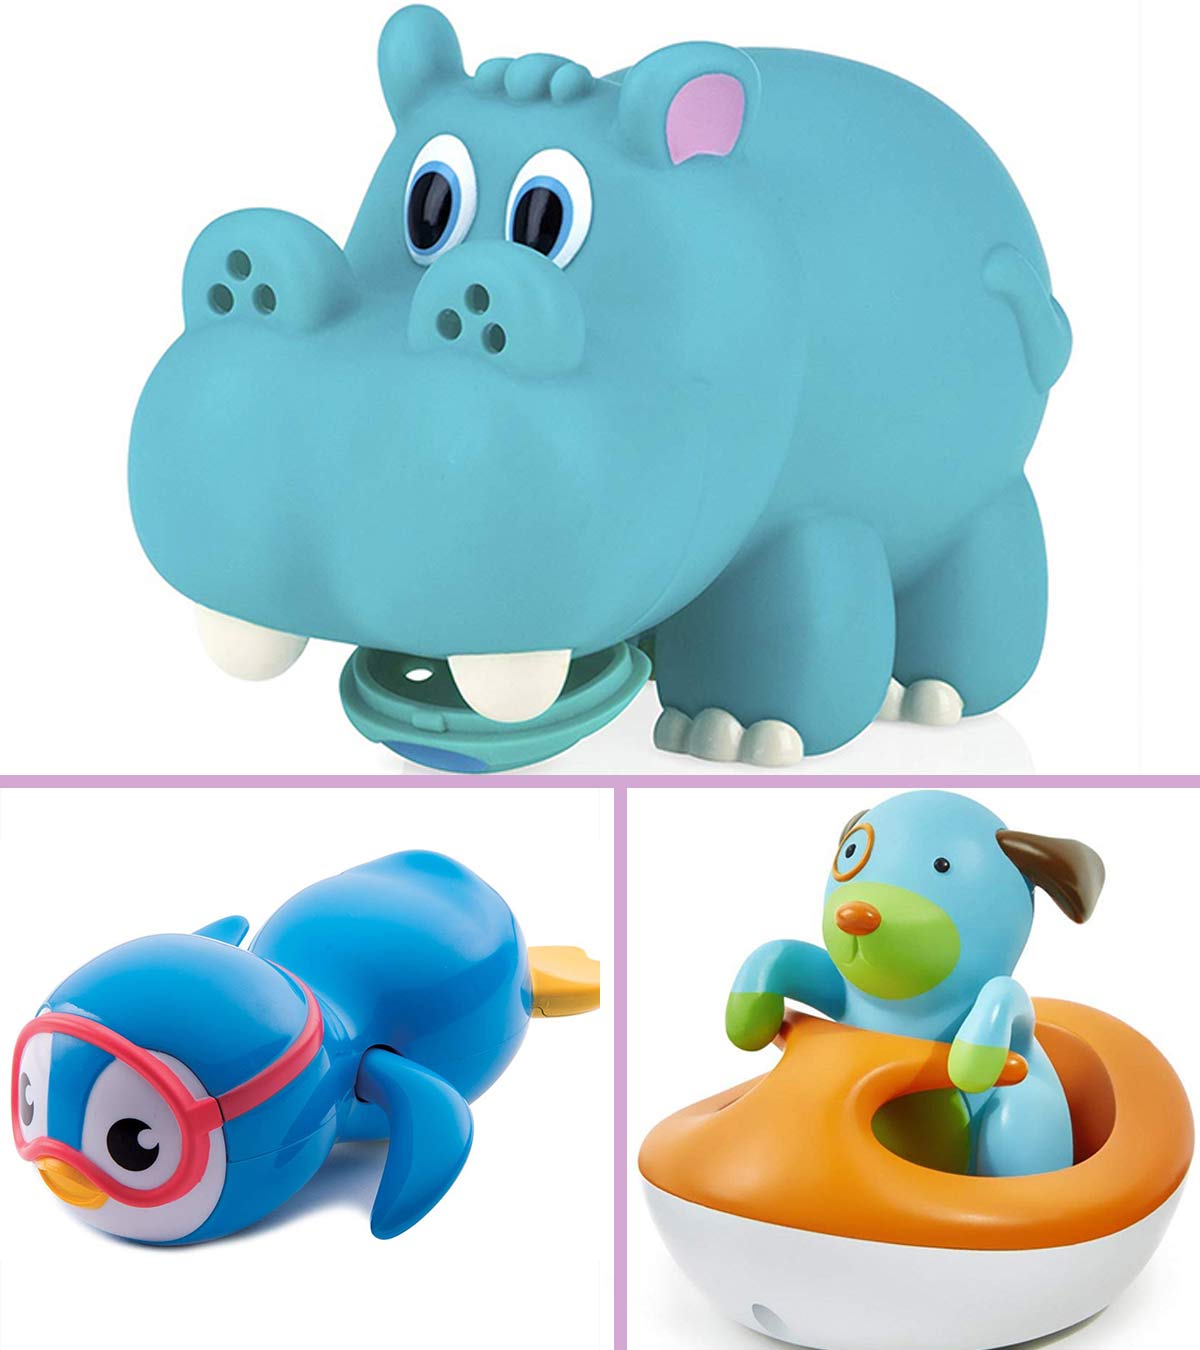 15 Best Bath Toys For Toddlers in 2022